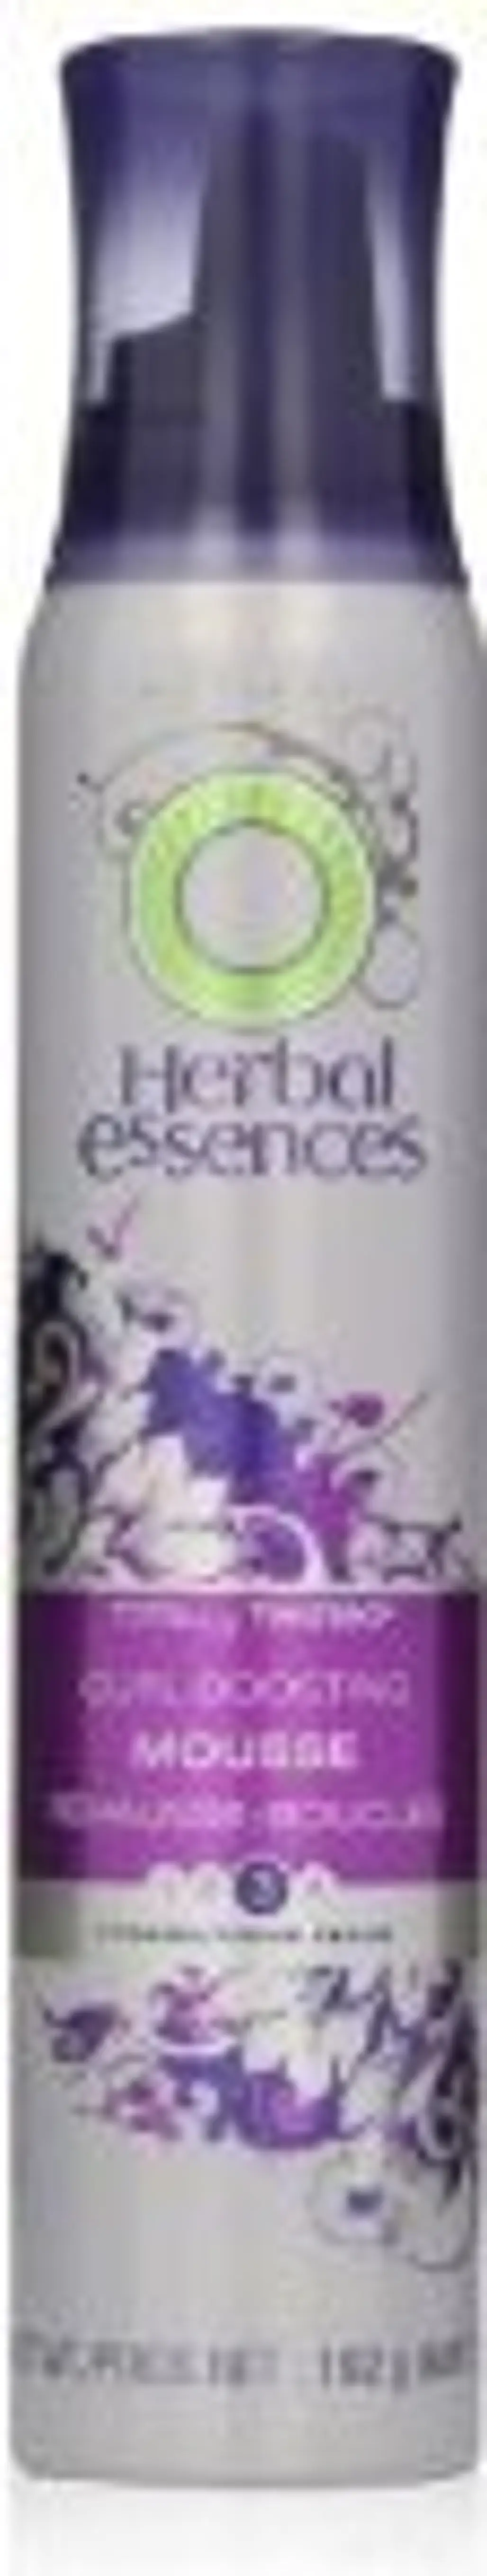 Herbal Essences Curl Boosting Mousse Totally Twisted